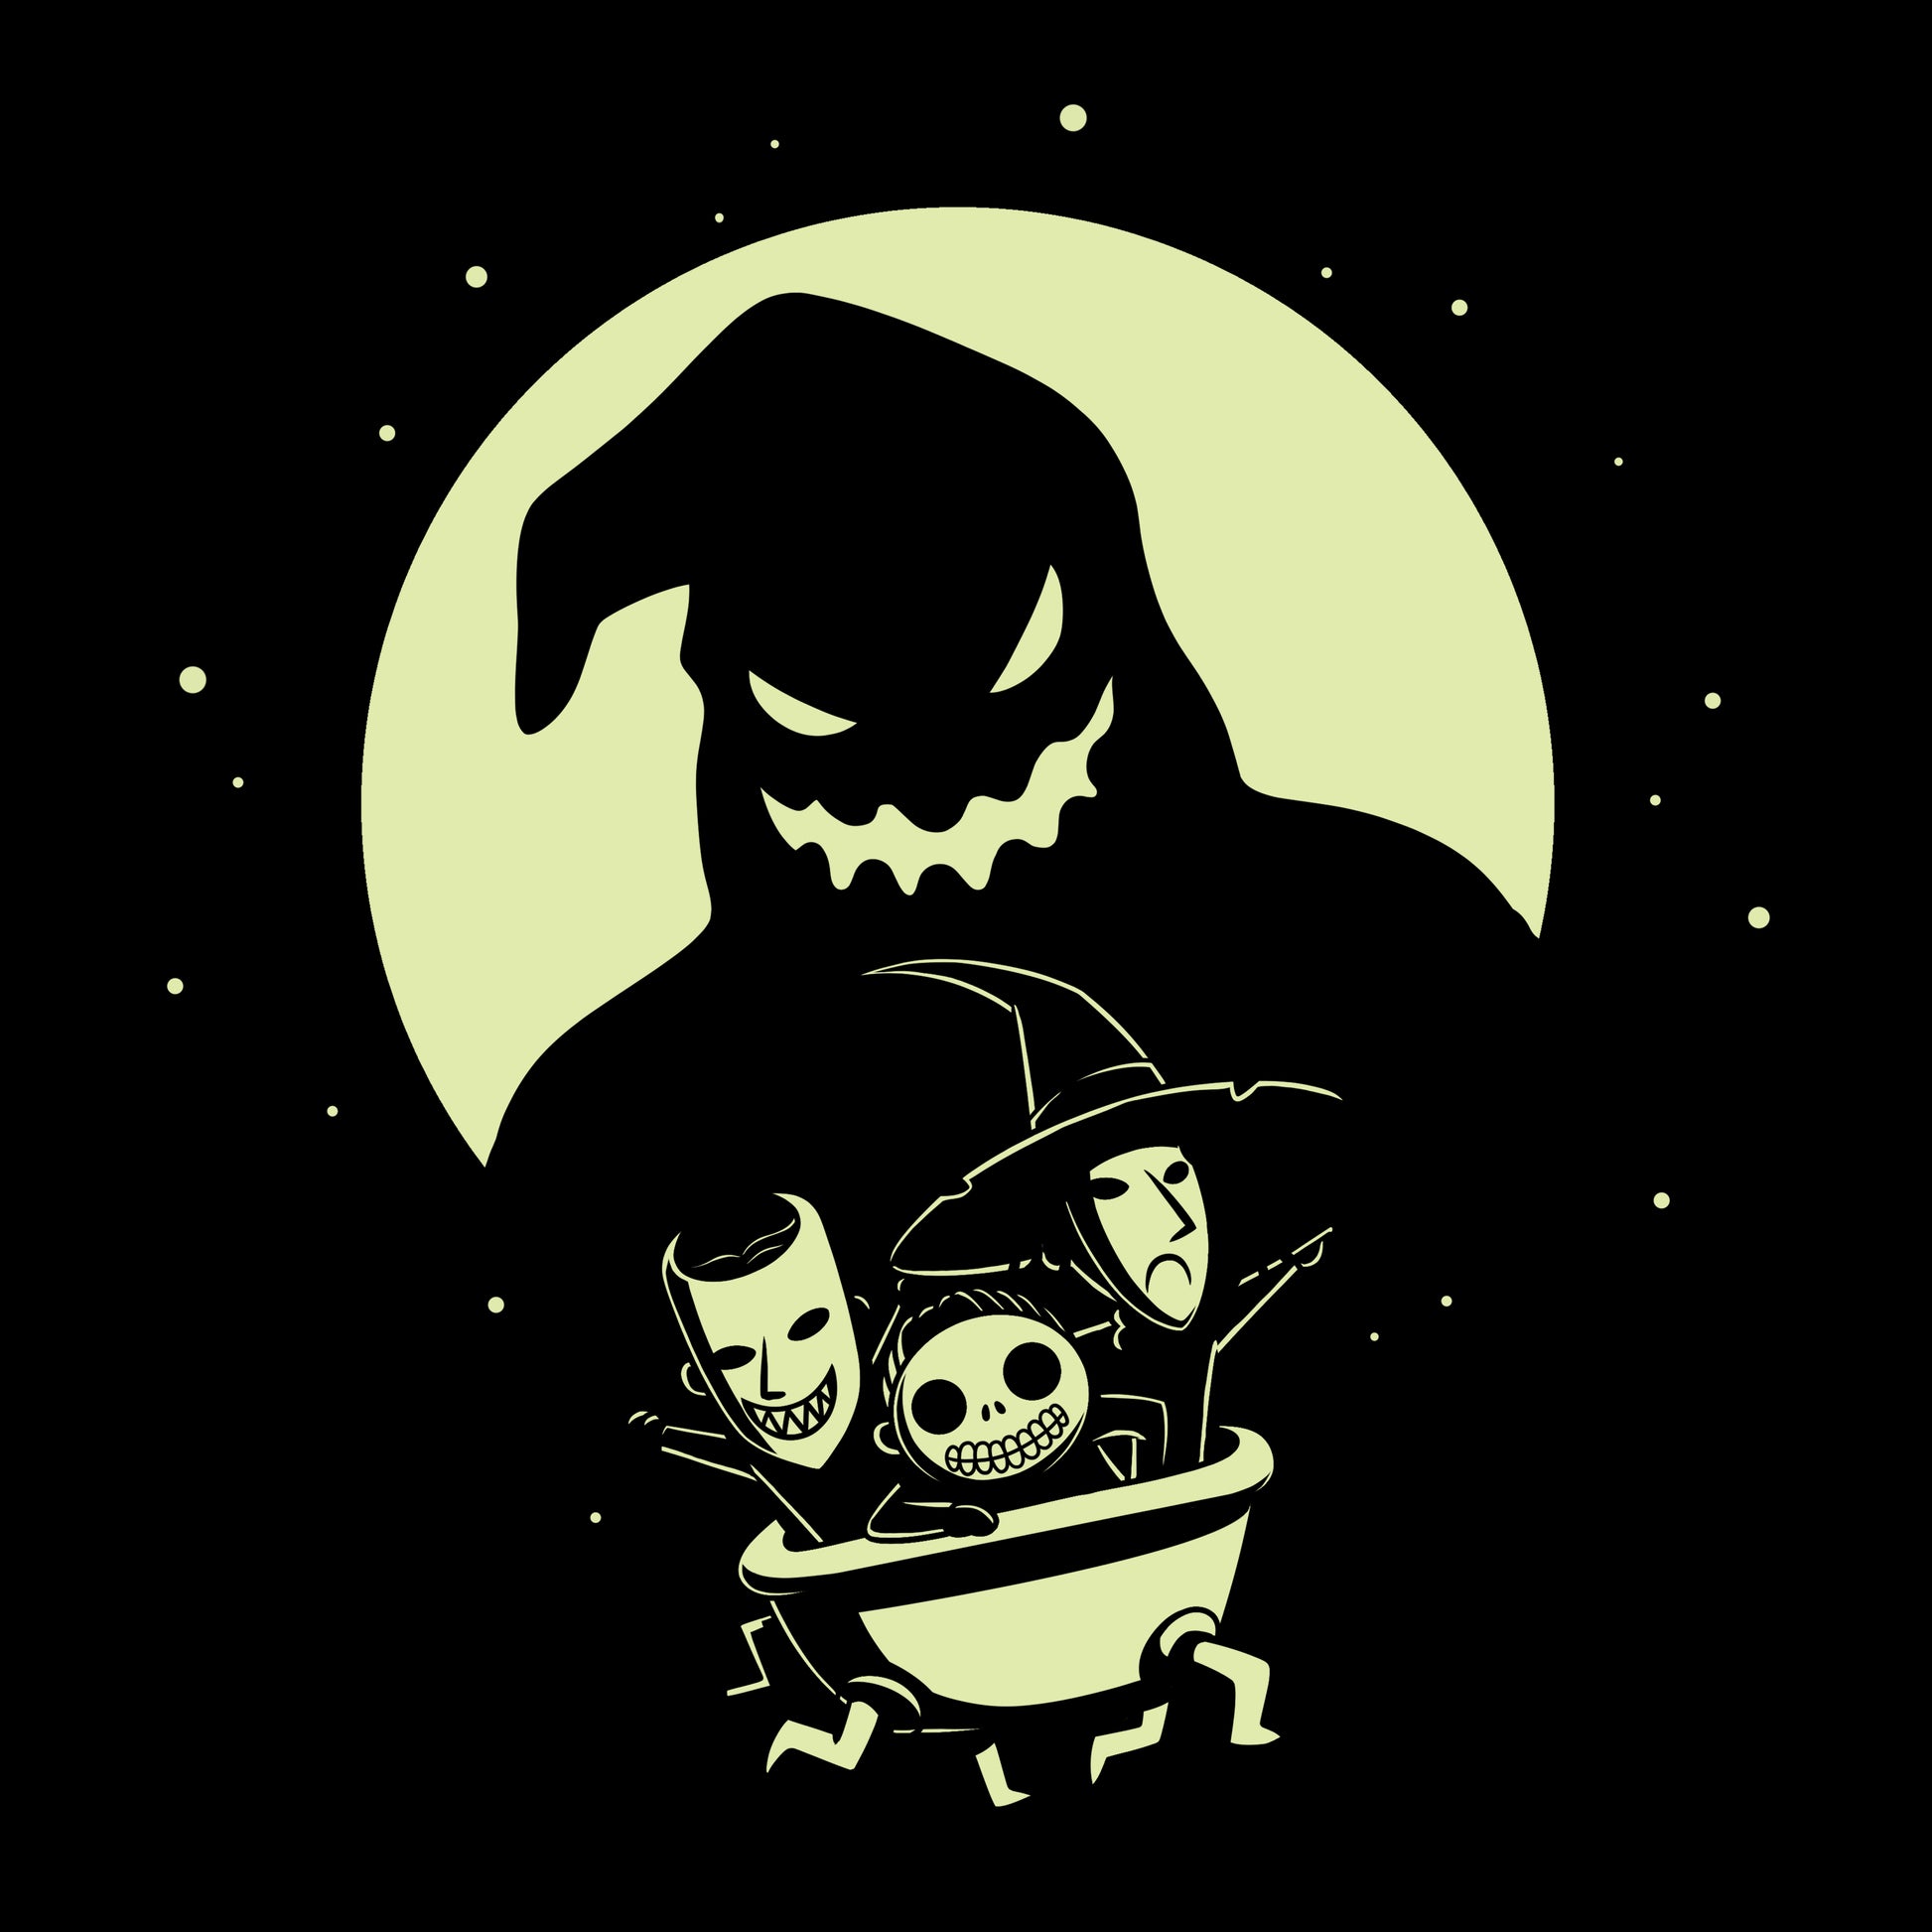 Men's T-shirt featuring Lock, Shock, and Barrel (Glow) from Nightmare Before Christmas, The Nightmare Before Christmas Officially Licensed.